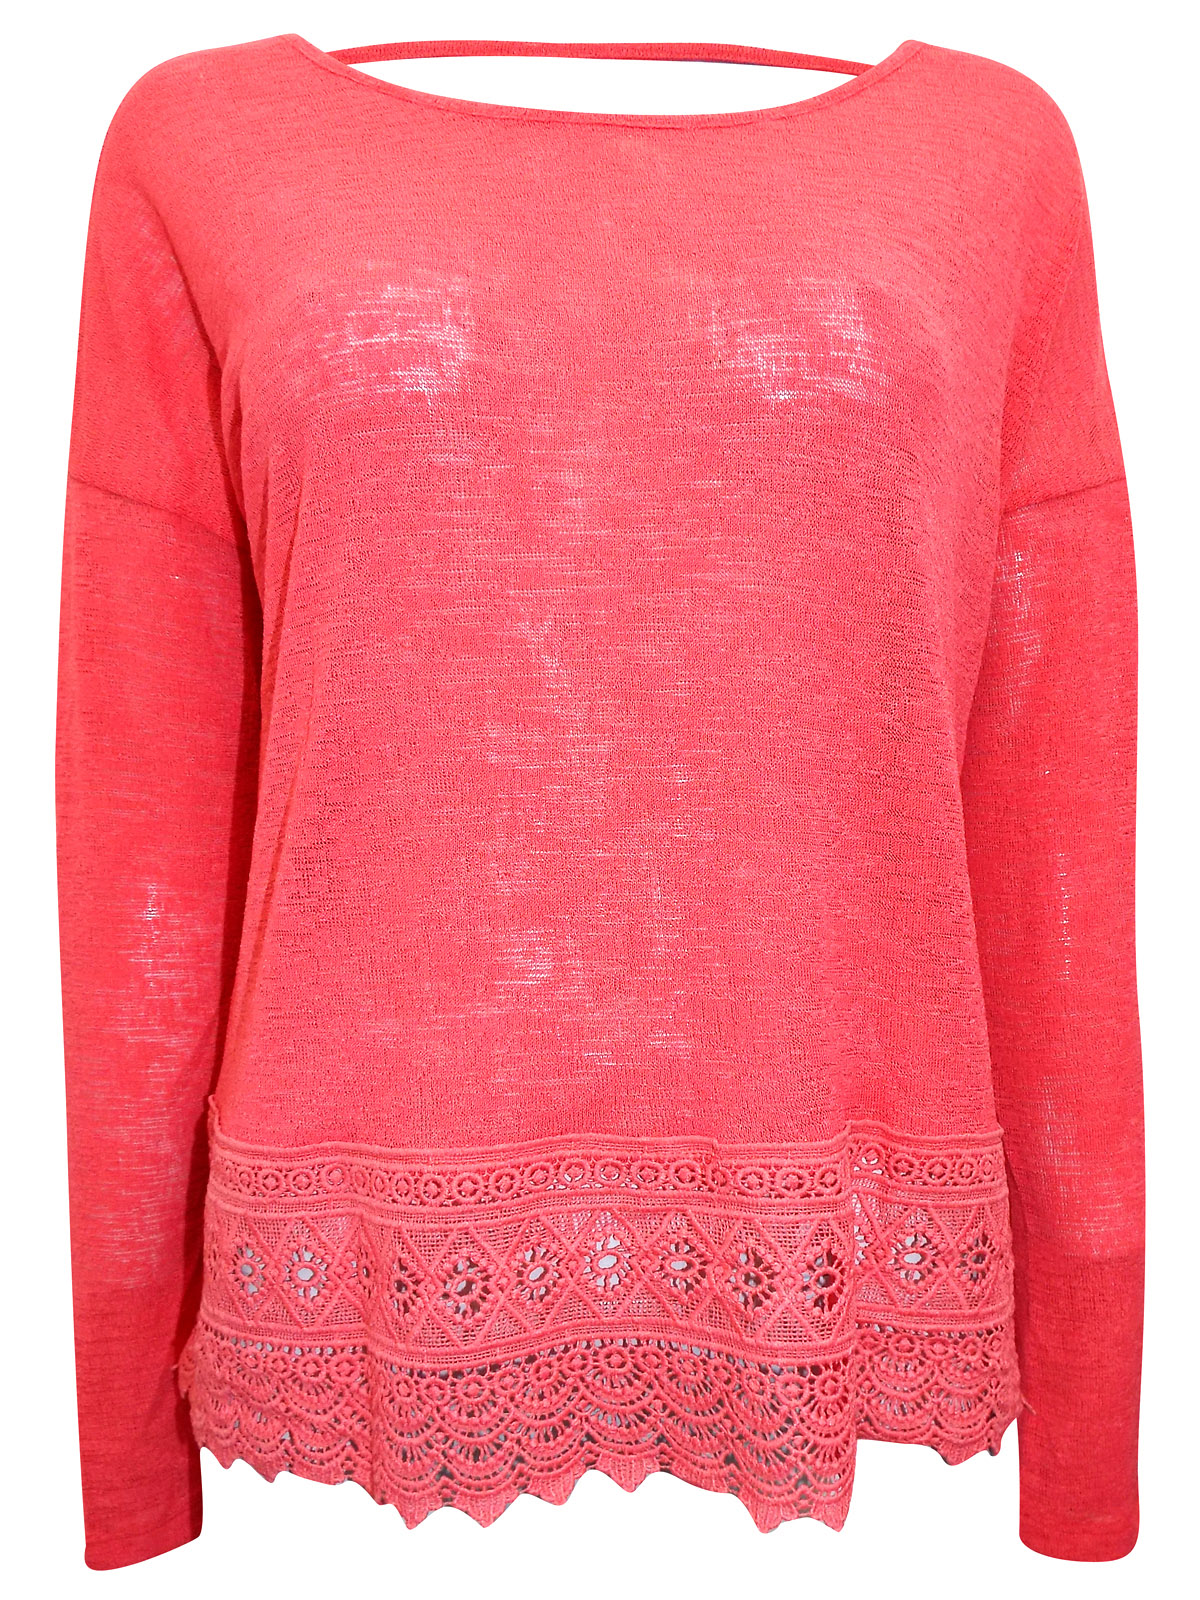 First Avenue CORAL Crochet Lace Long Sleeve Top - Size 10 to 20